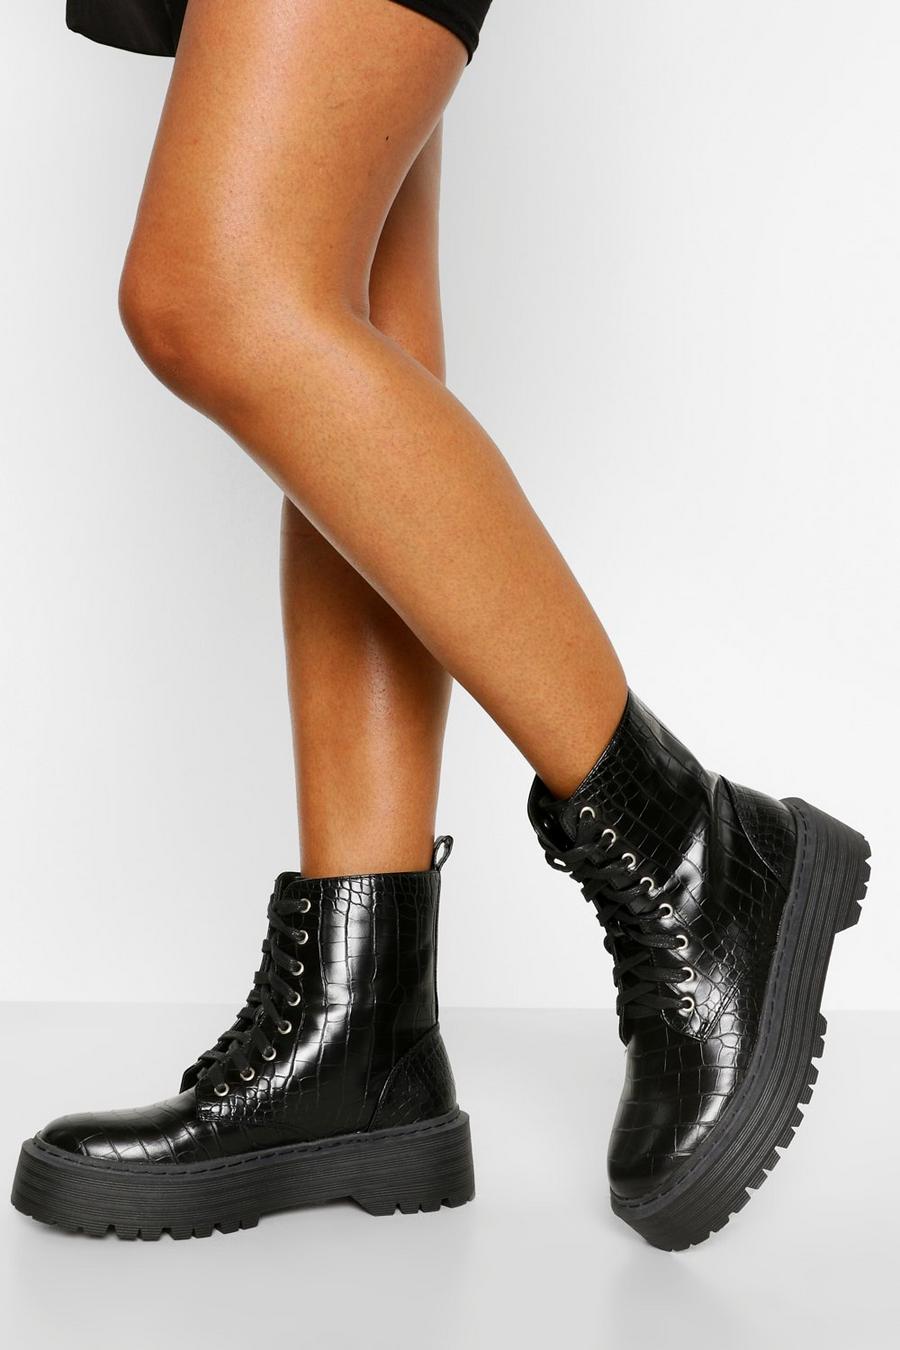 Black Croc Lace Up Chunky Hiker Boots